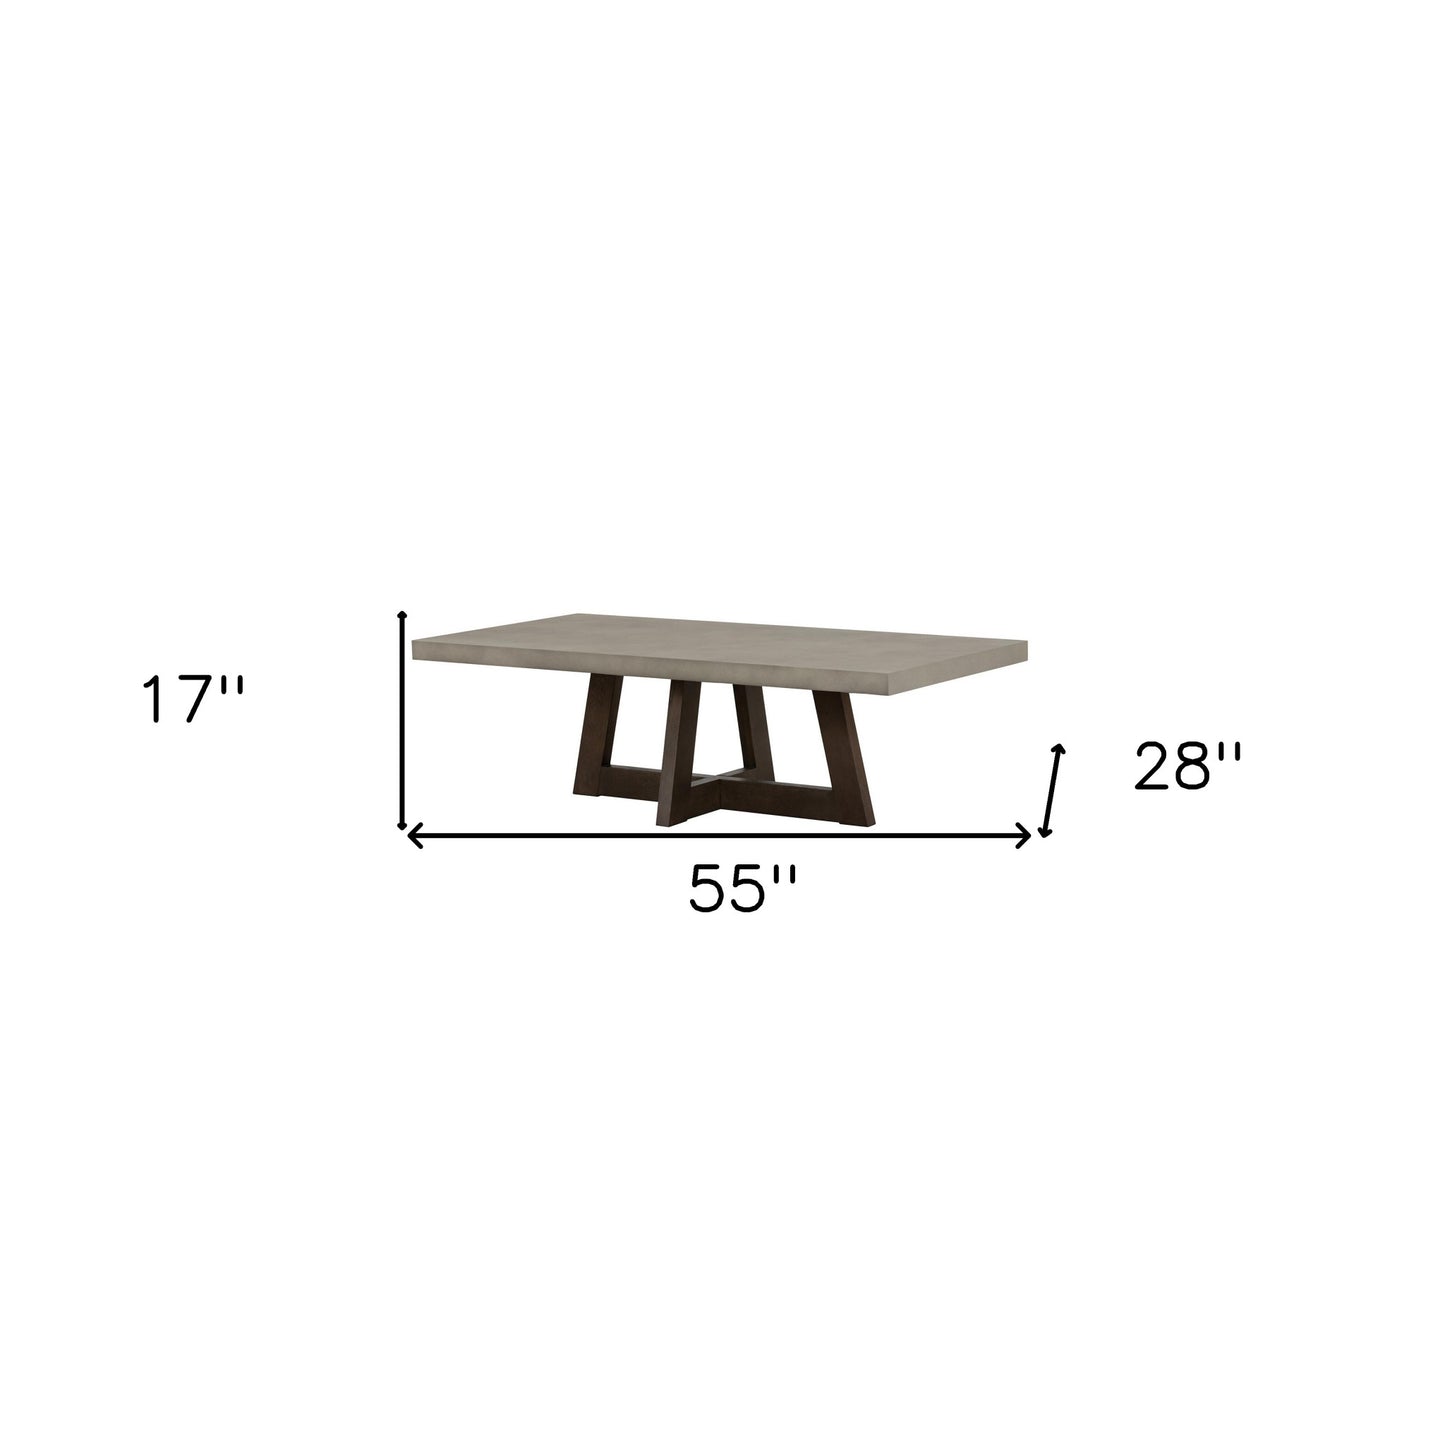 55" Dark Grey And Brown Concrete Rectangular Coffee Table By Homeroots